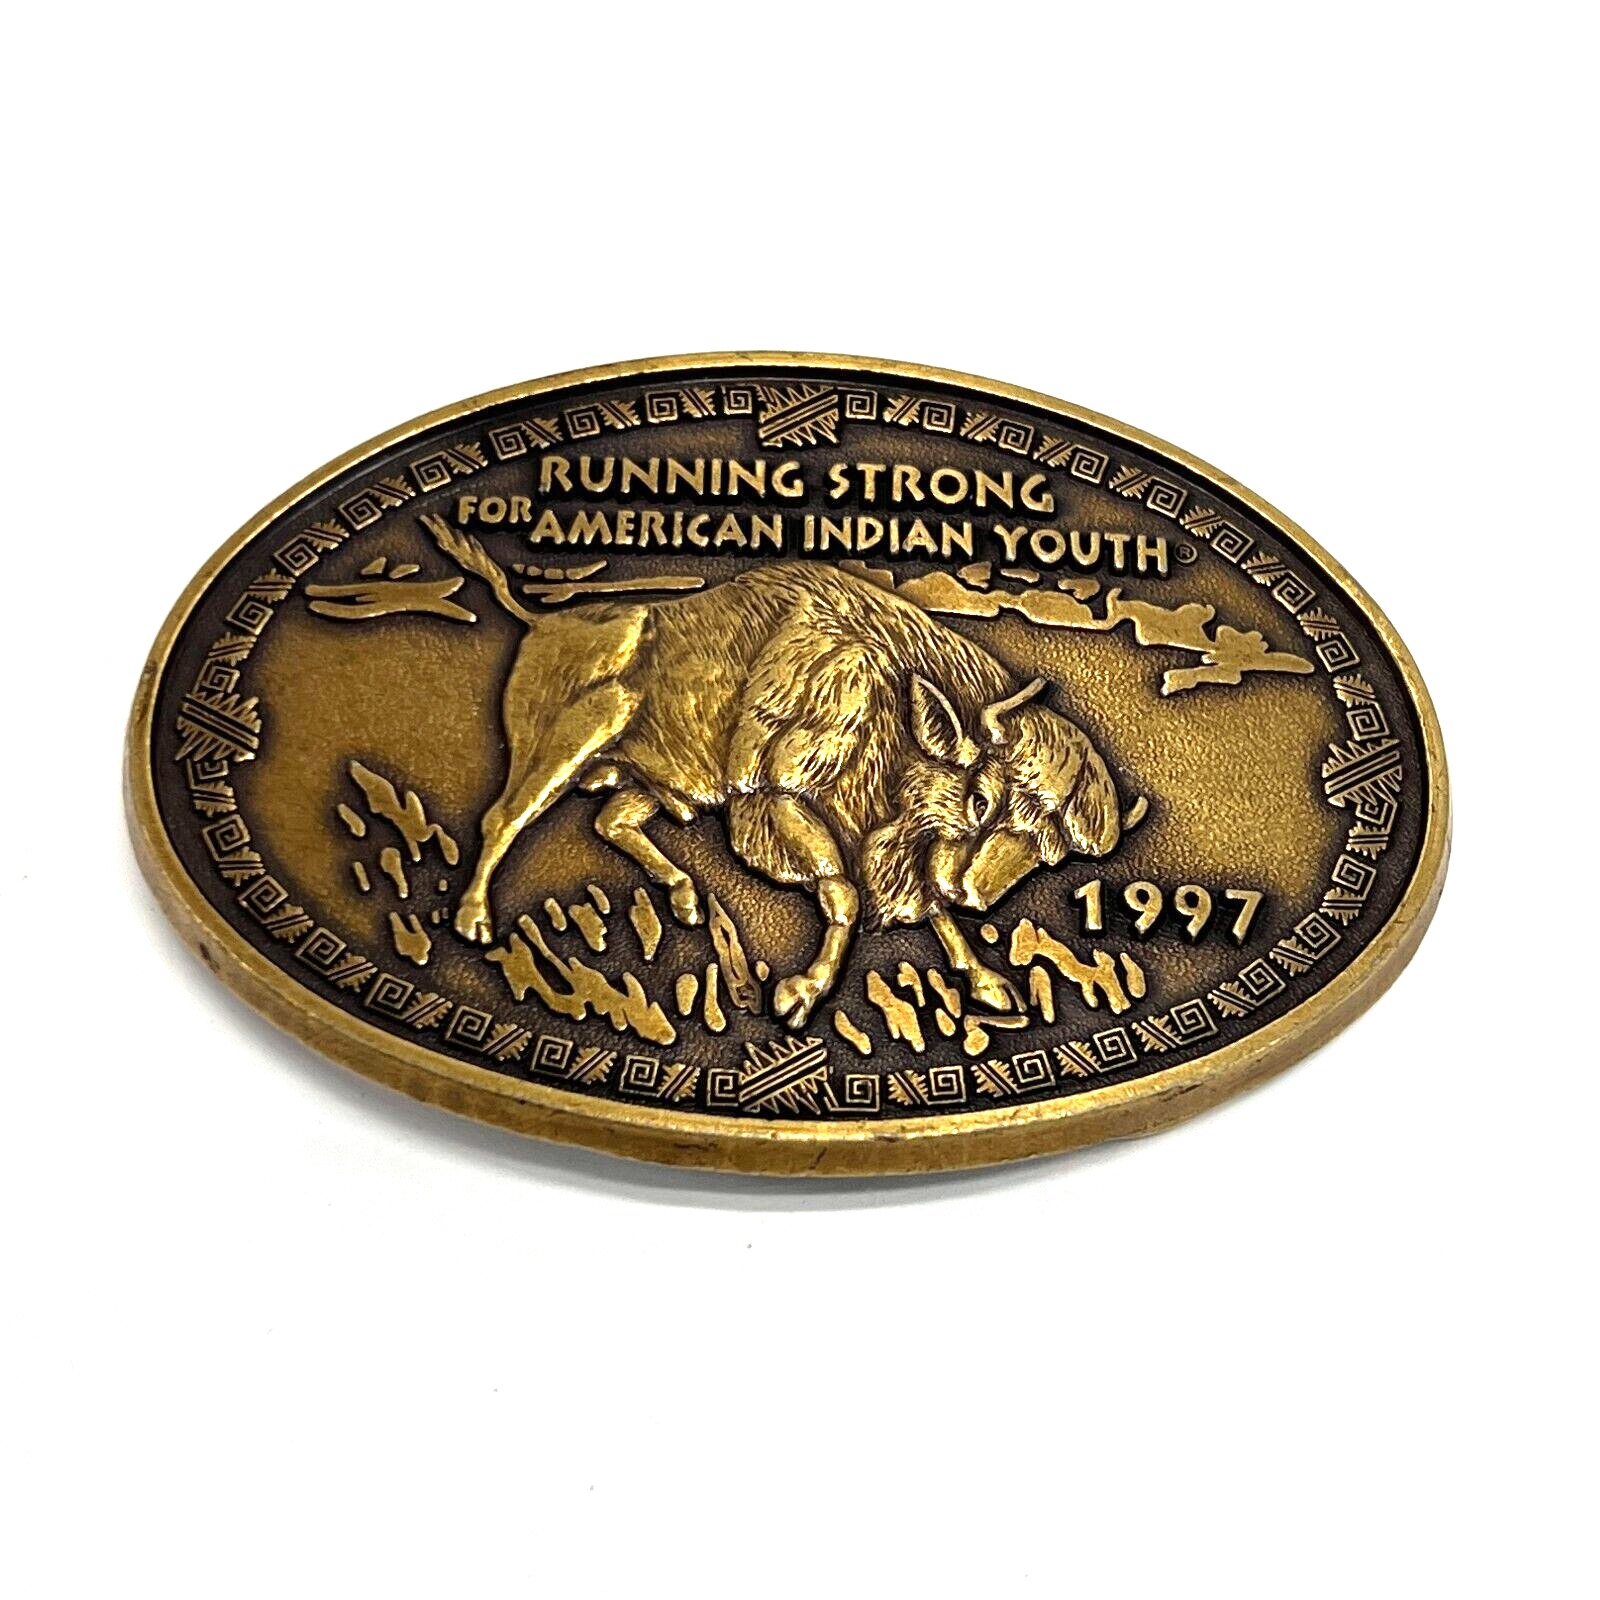 Vintage 1997 Running Strong For American Indian Youth Belt Buckle Bull